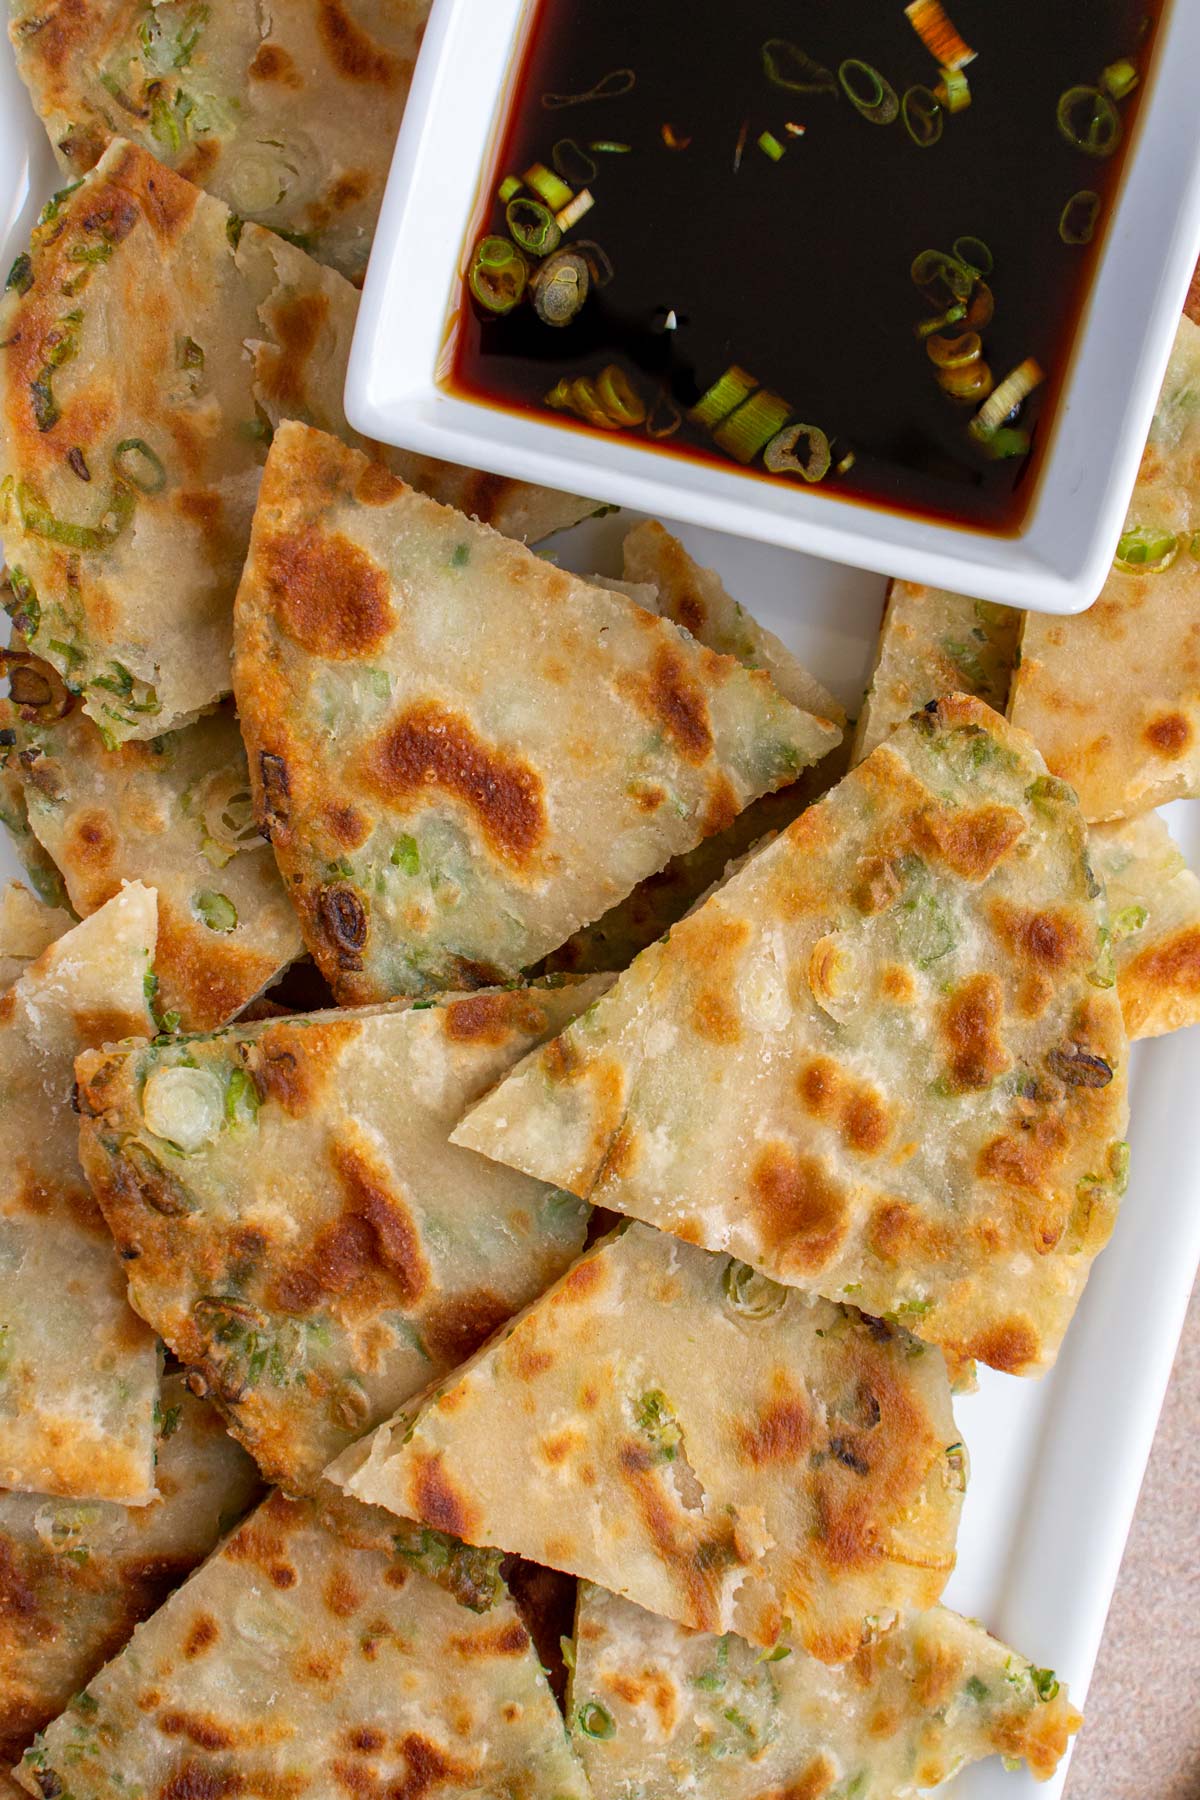 Closeup of a platter of Chinese scallion pancake triangles with soy dipping sauce.